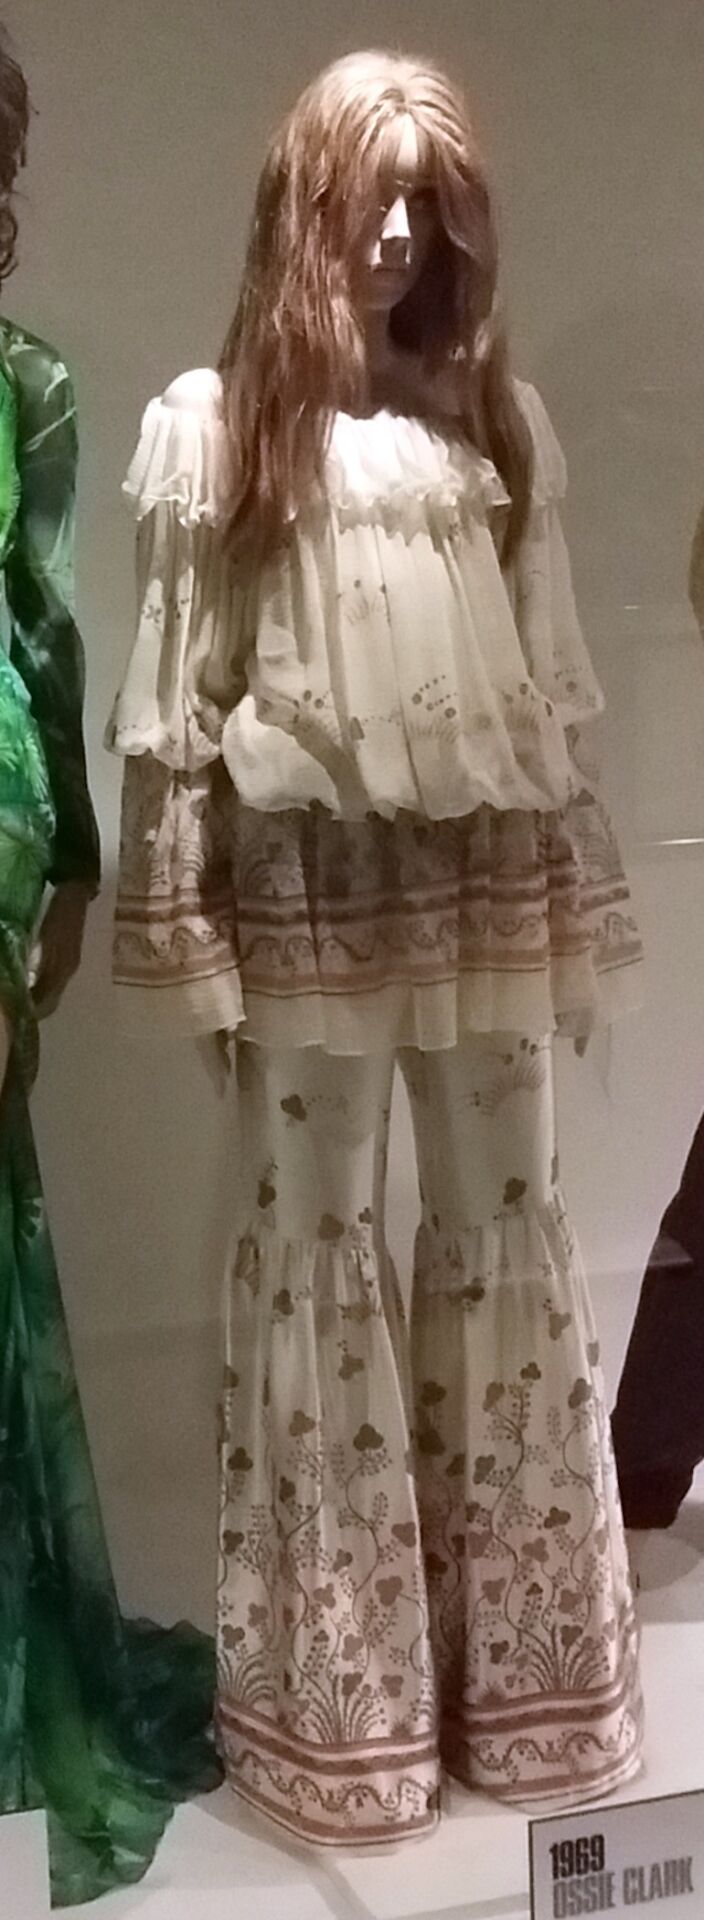 Ossie Clark satin and chiffon trouser suit in Botticelli print, 1969. Photo Credit: © Mabalu via Wikimedia Commons.